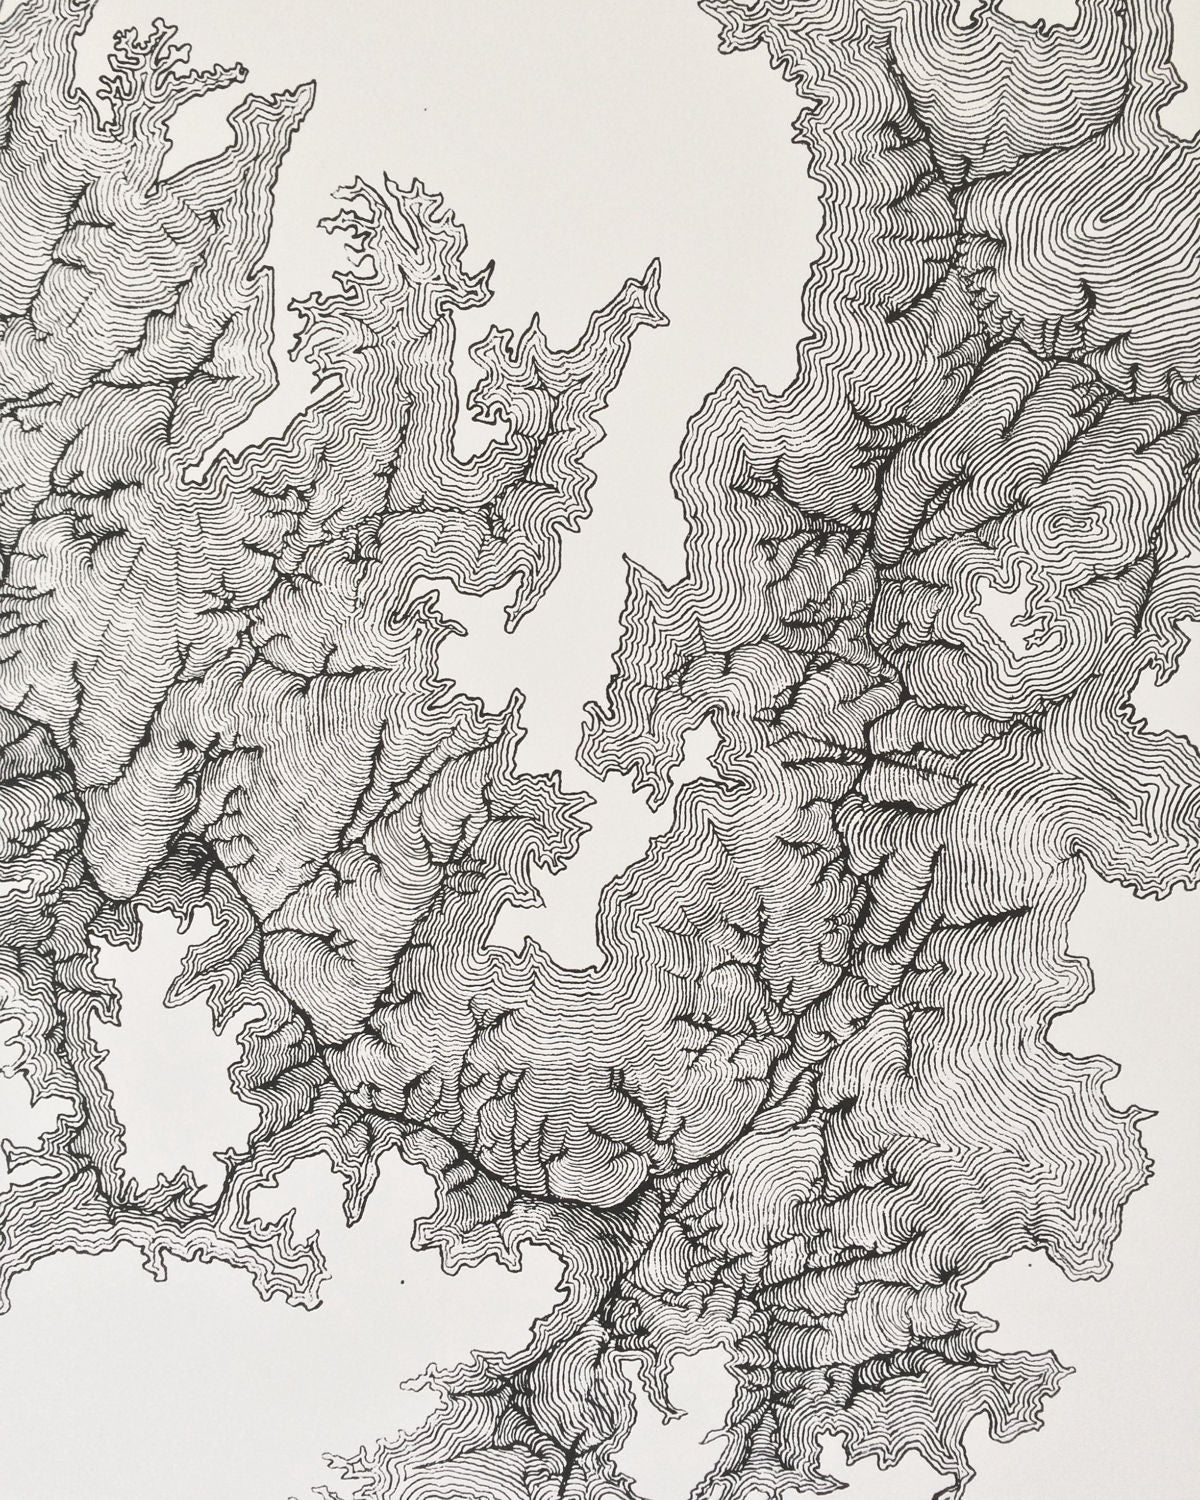 Grand Canyon Topographial Map Set of 3 - 24x36 inch giclee prints